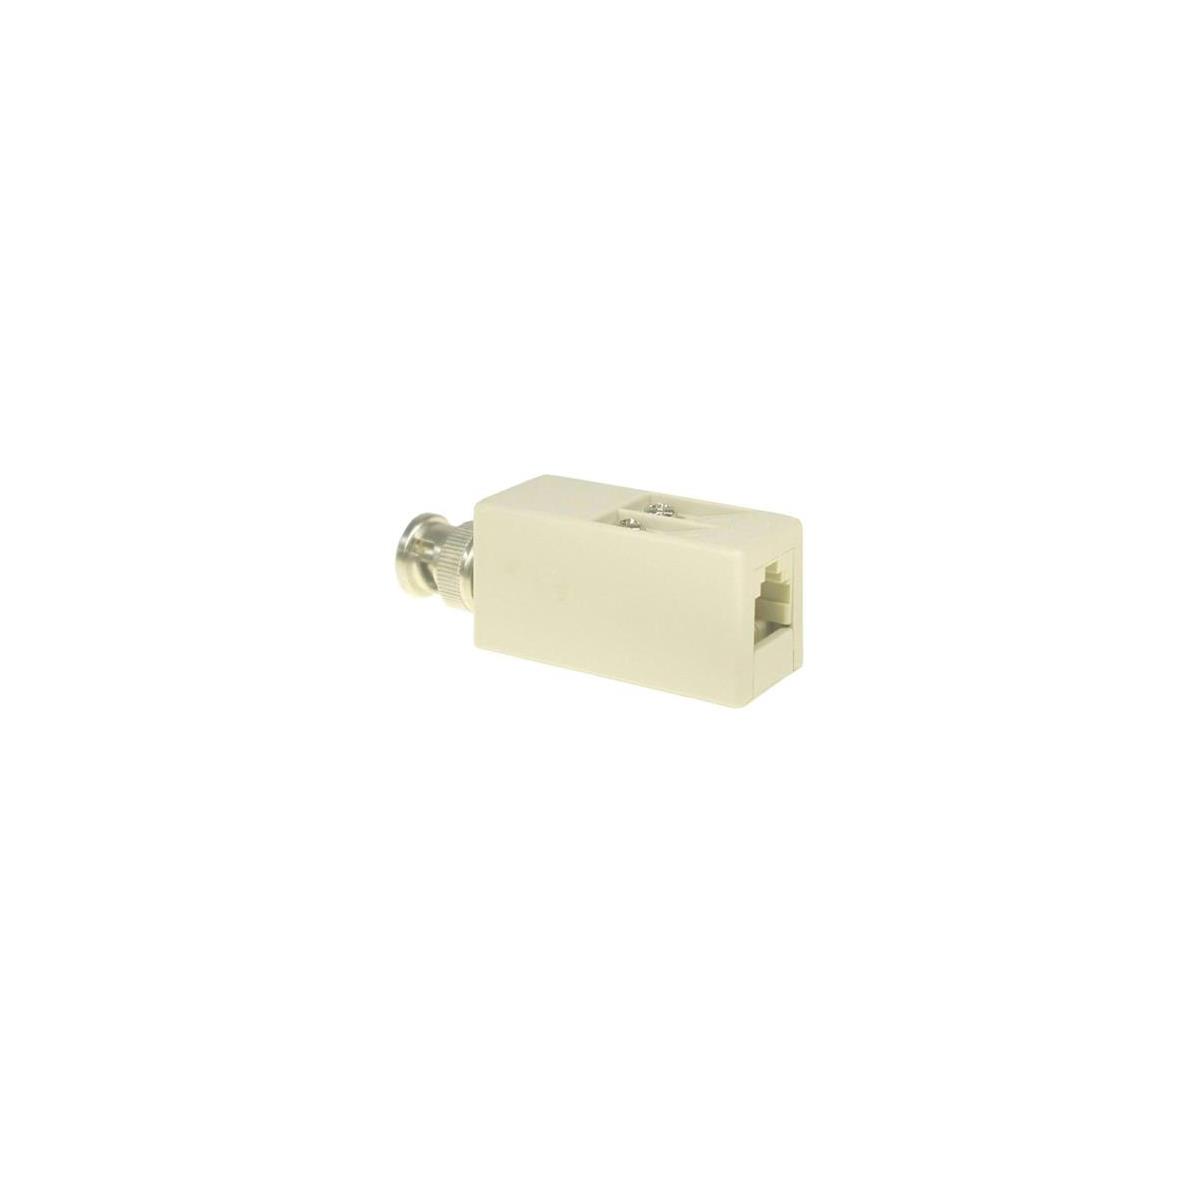 Image of Link Electronics Link ELectronics BNC Male to RJ-11 Connector with Screw Terminal Balun